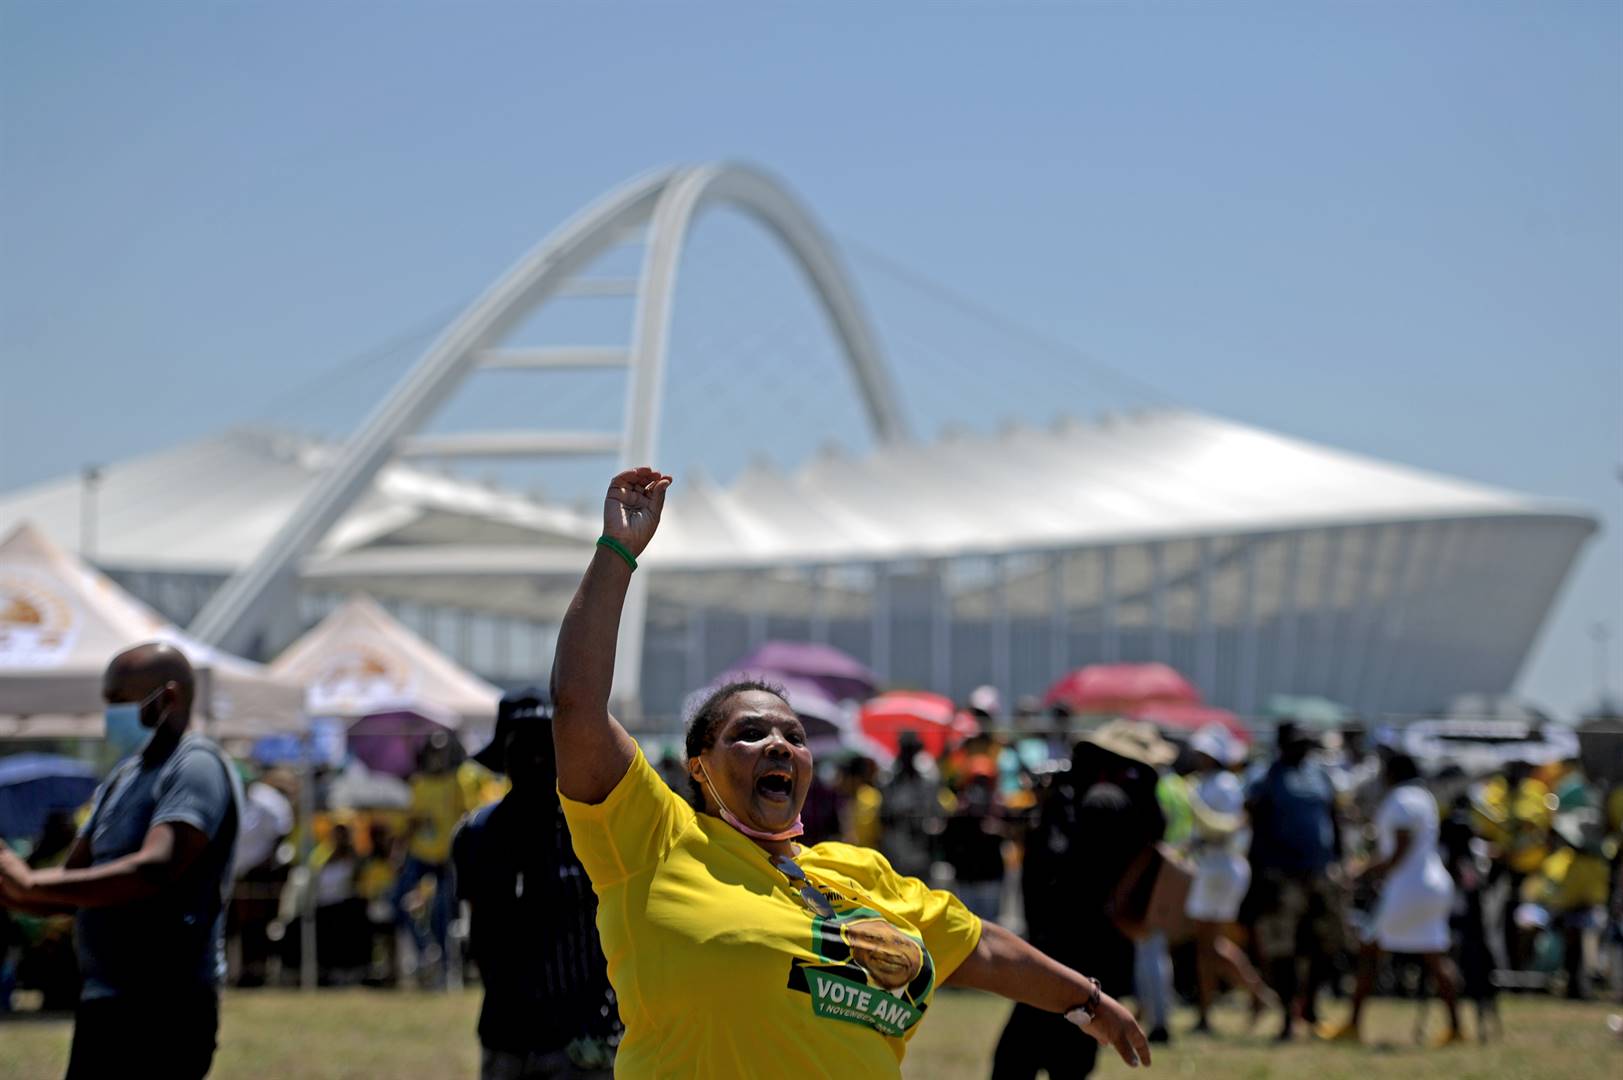 Hundreds of people gathered at the People's Park in Durban to pray for the wellbeing of former president Jacob Zuma who is out of jail on medical parole. Photo: Tebogo Letsie